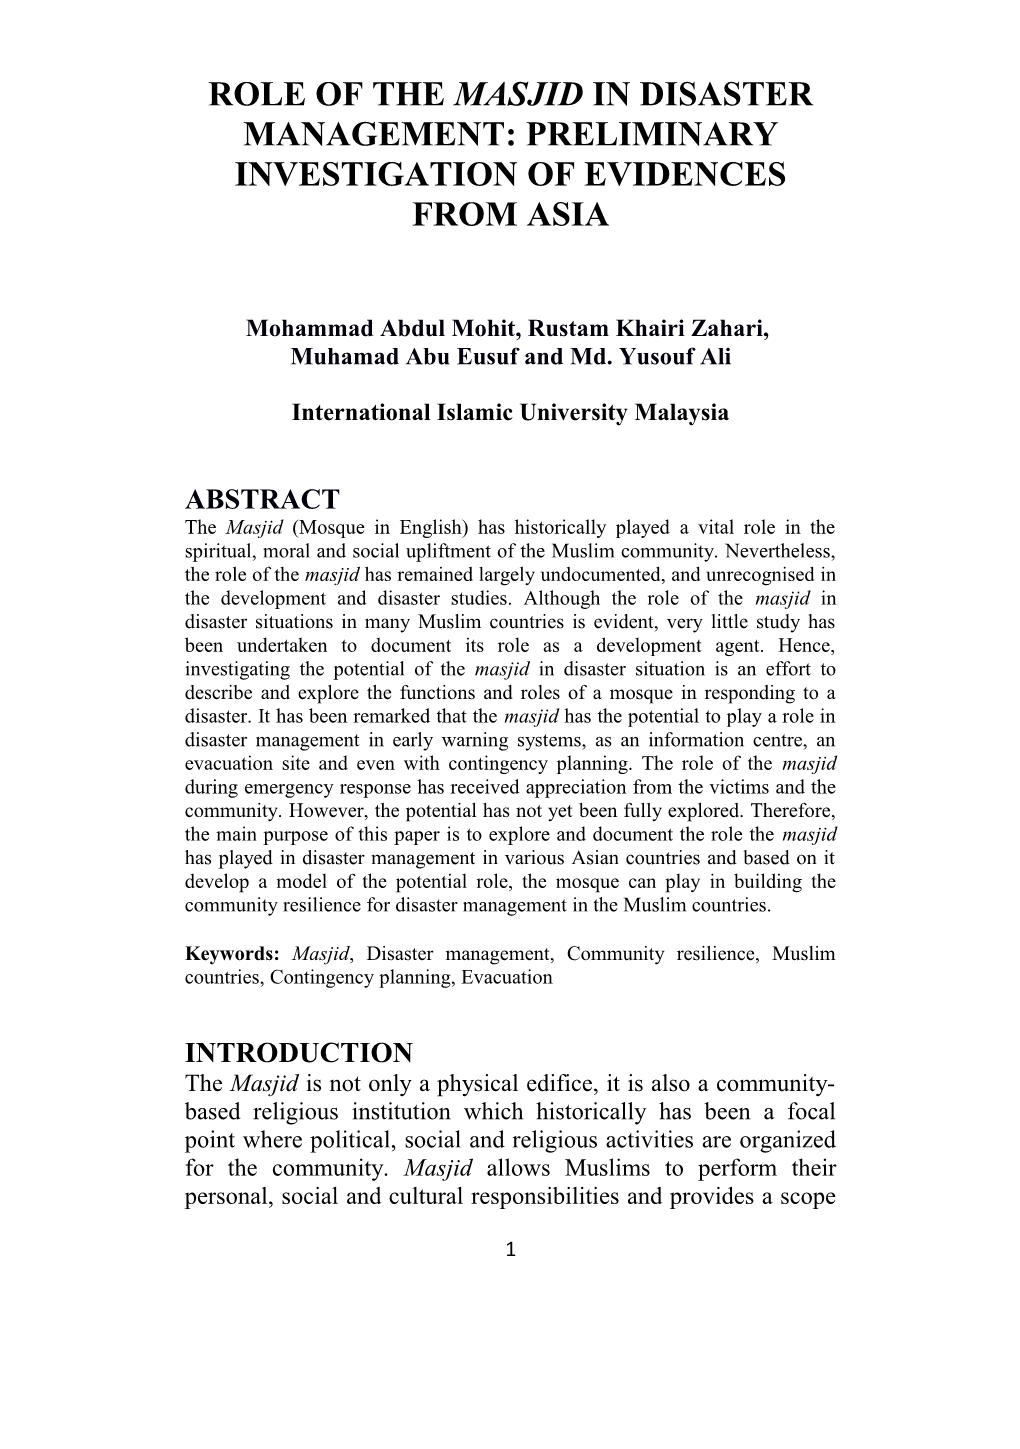 Role of the Masjid in Disaster Management: Investigating Cross-Cultural Evidence from Asia